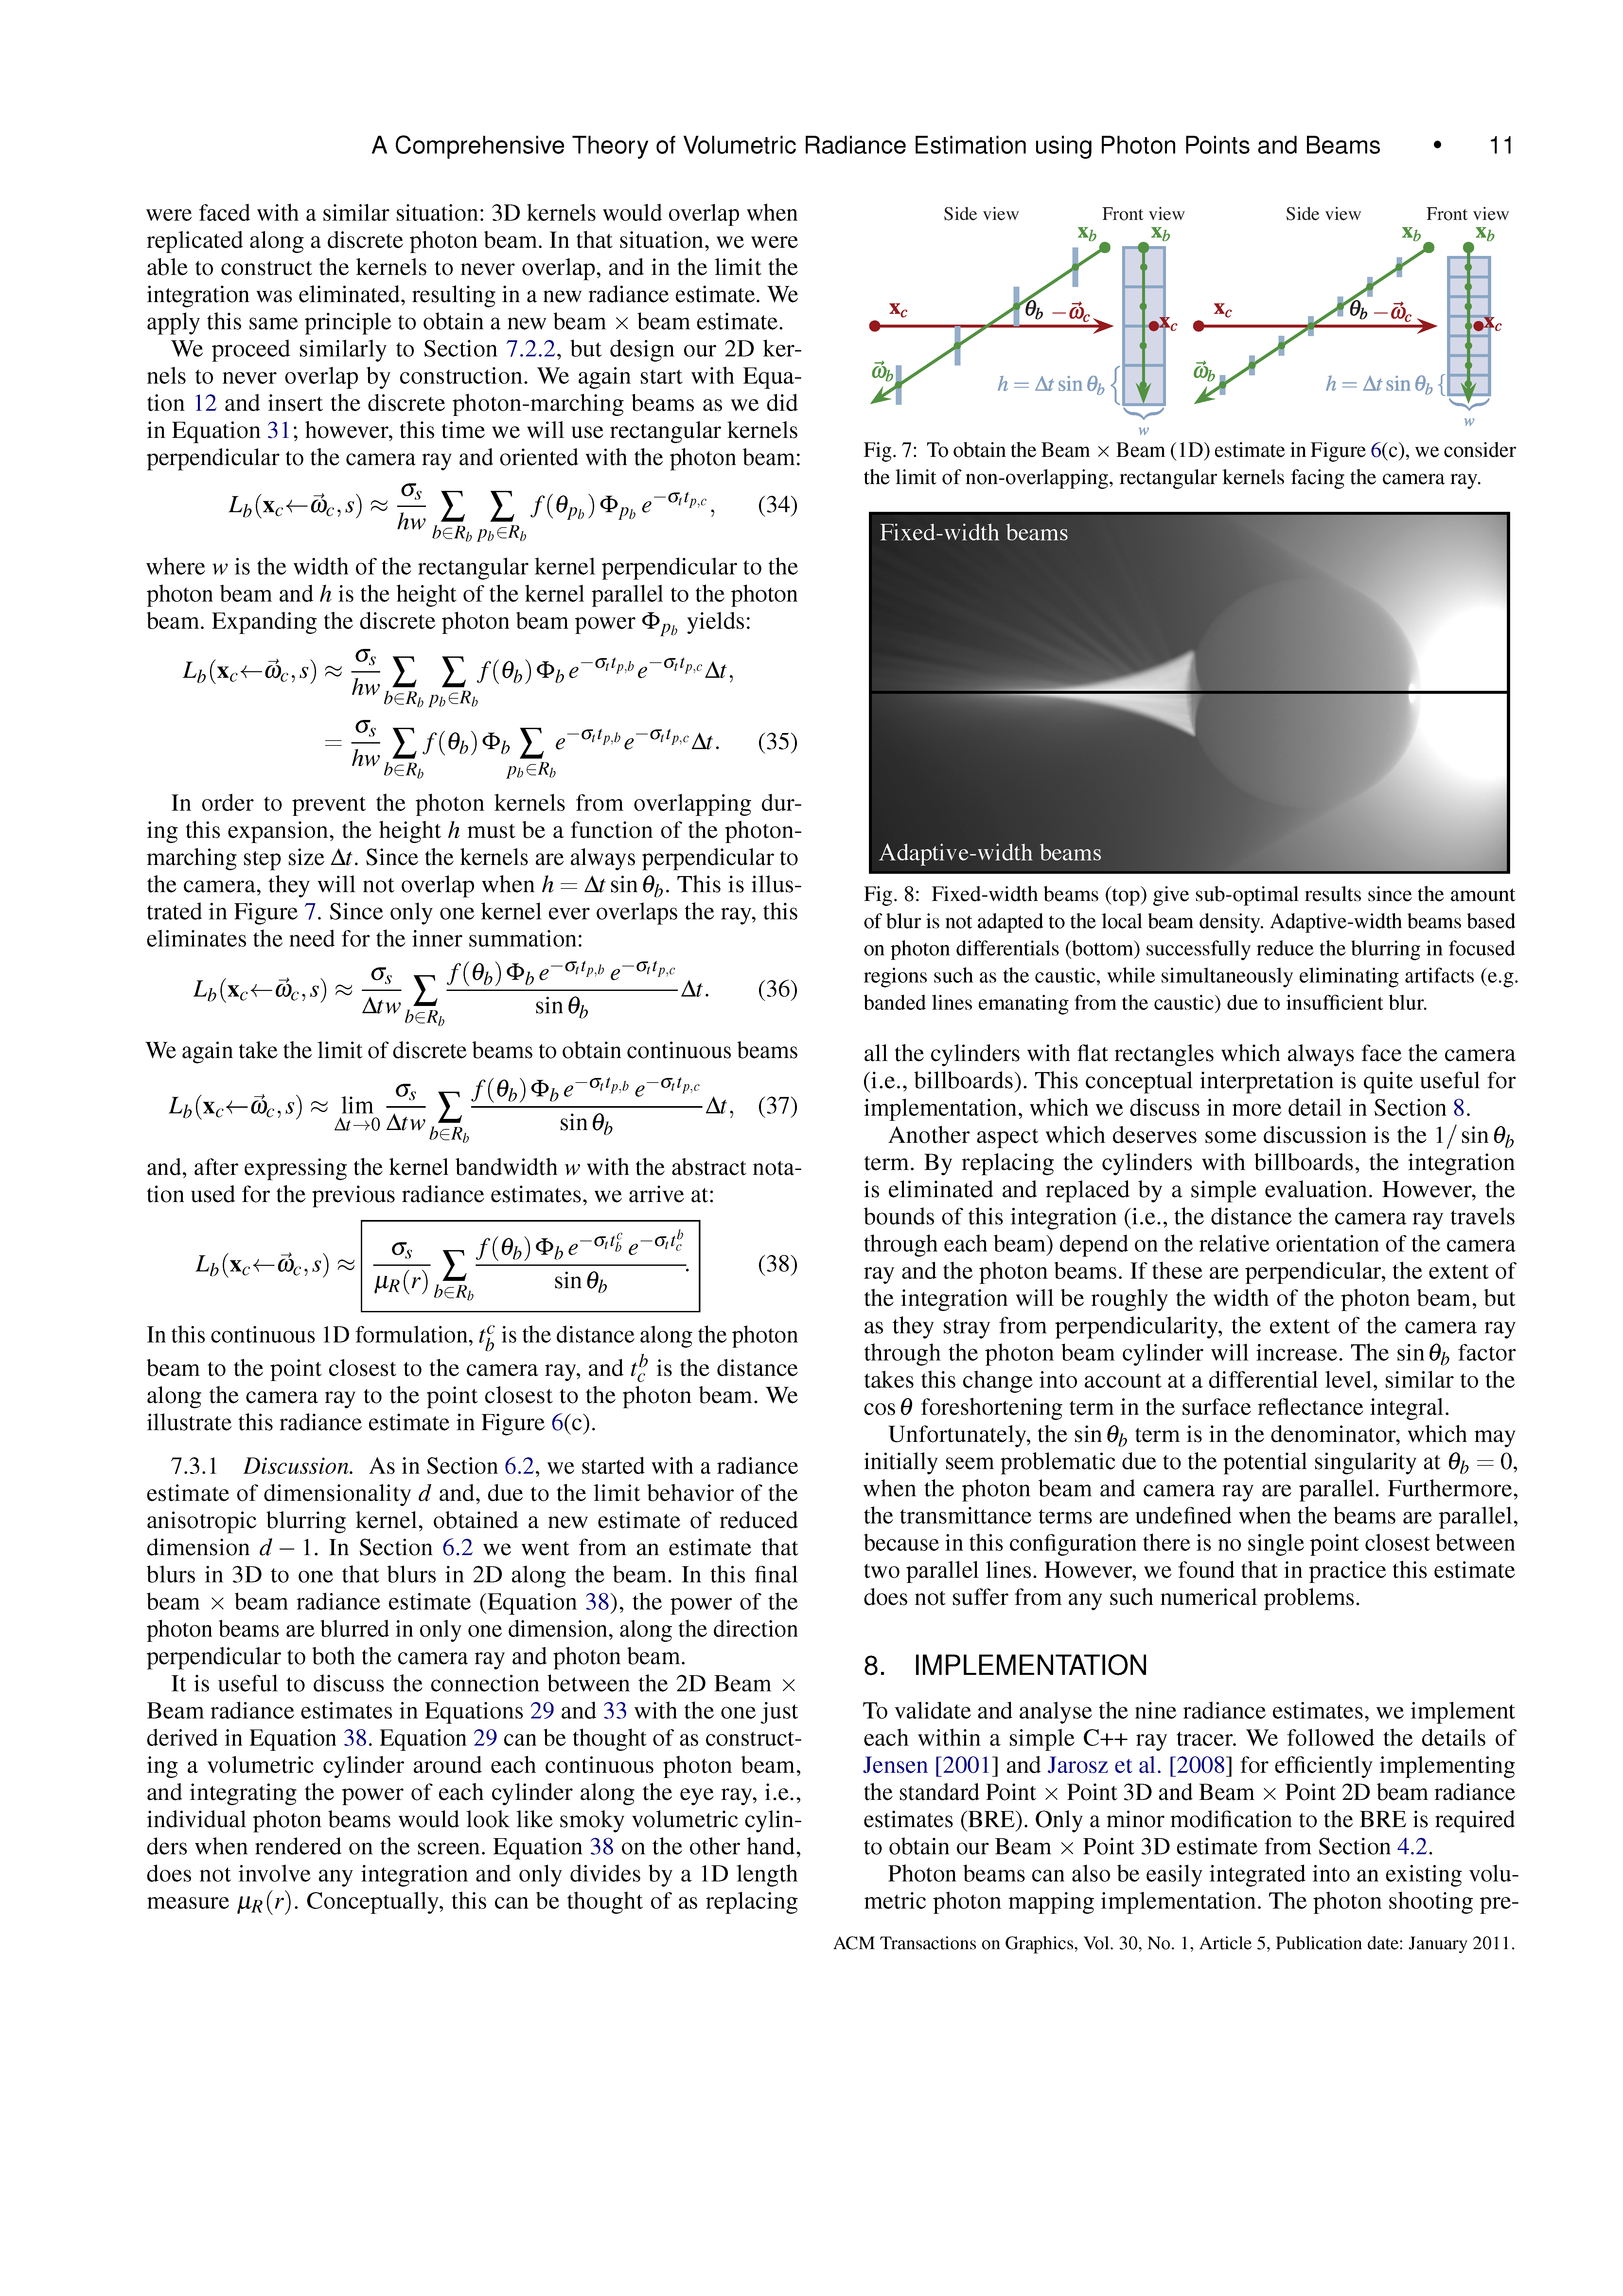 A Comprehensive Theory of Volumetric Radiance Estimation Using Photon Points and Beams Page 11